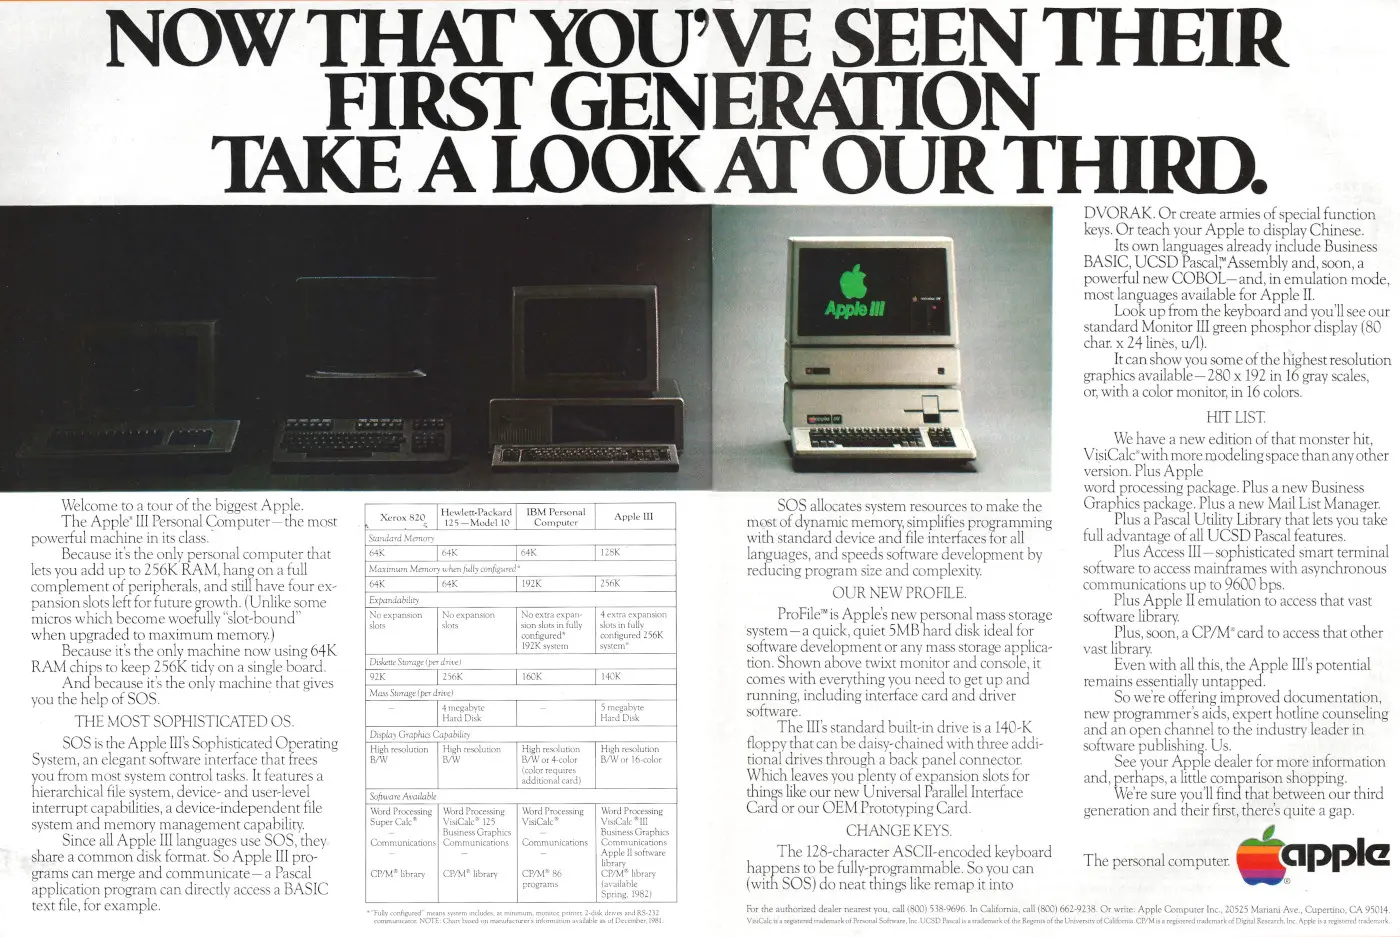 Apple Advert: Apple III: Now that you've seen their first generation, take a look at our third, from Personal Computing, May 1982